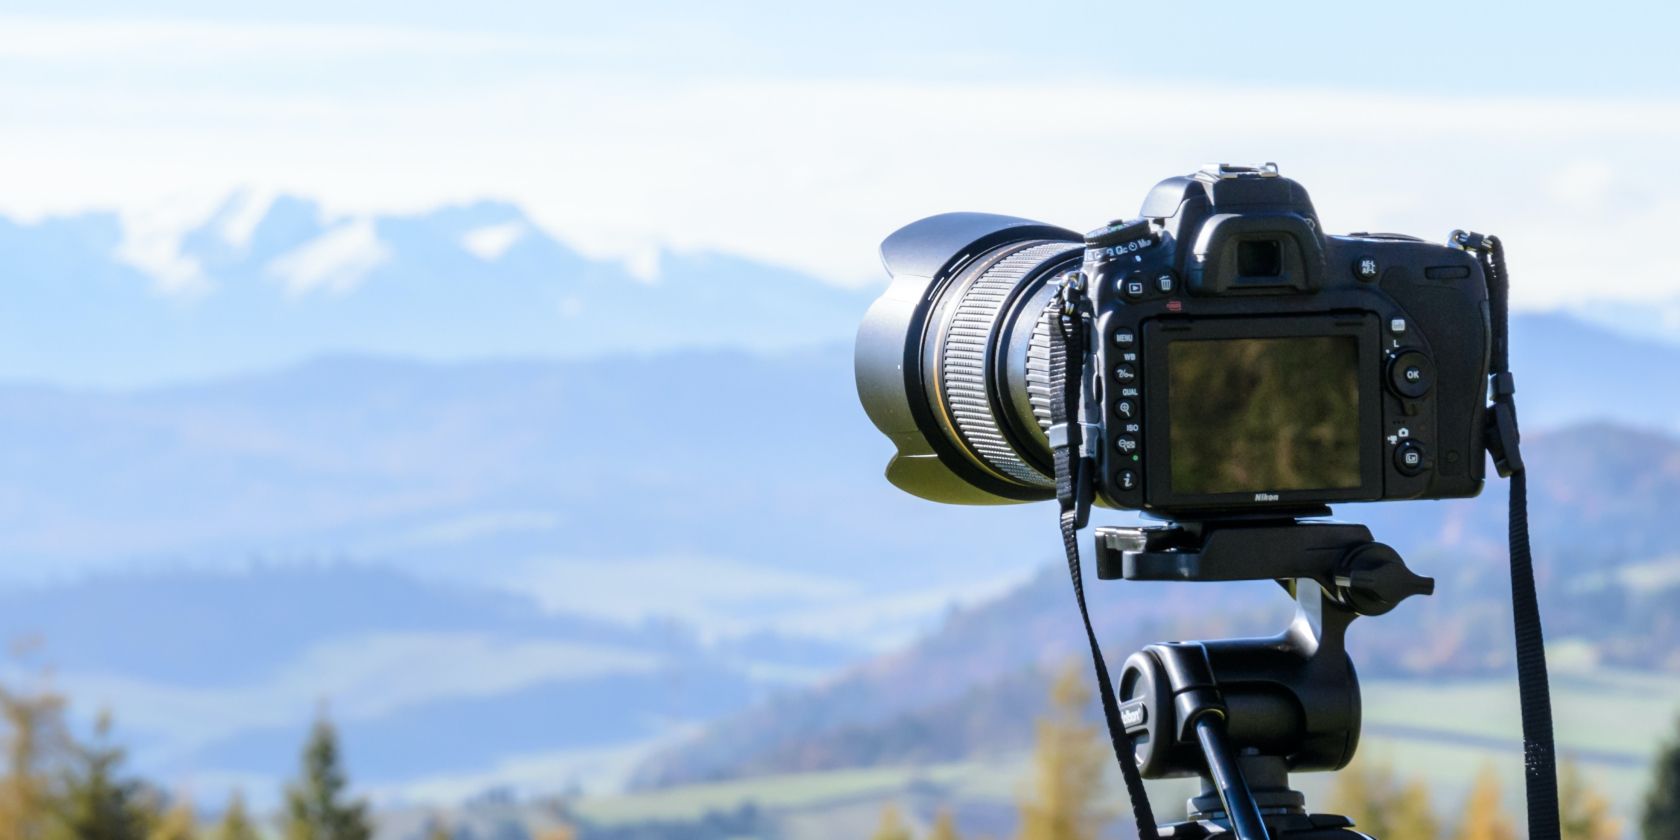 Camera mounted on tripod with mountains in background